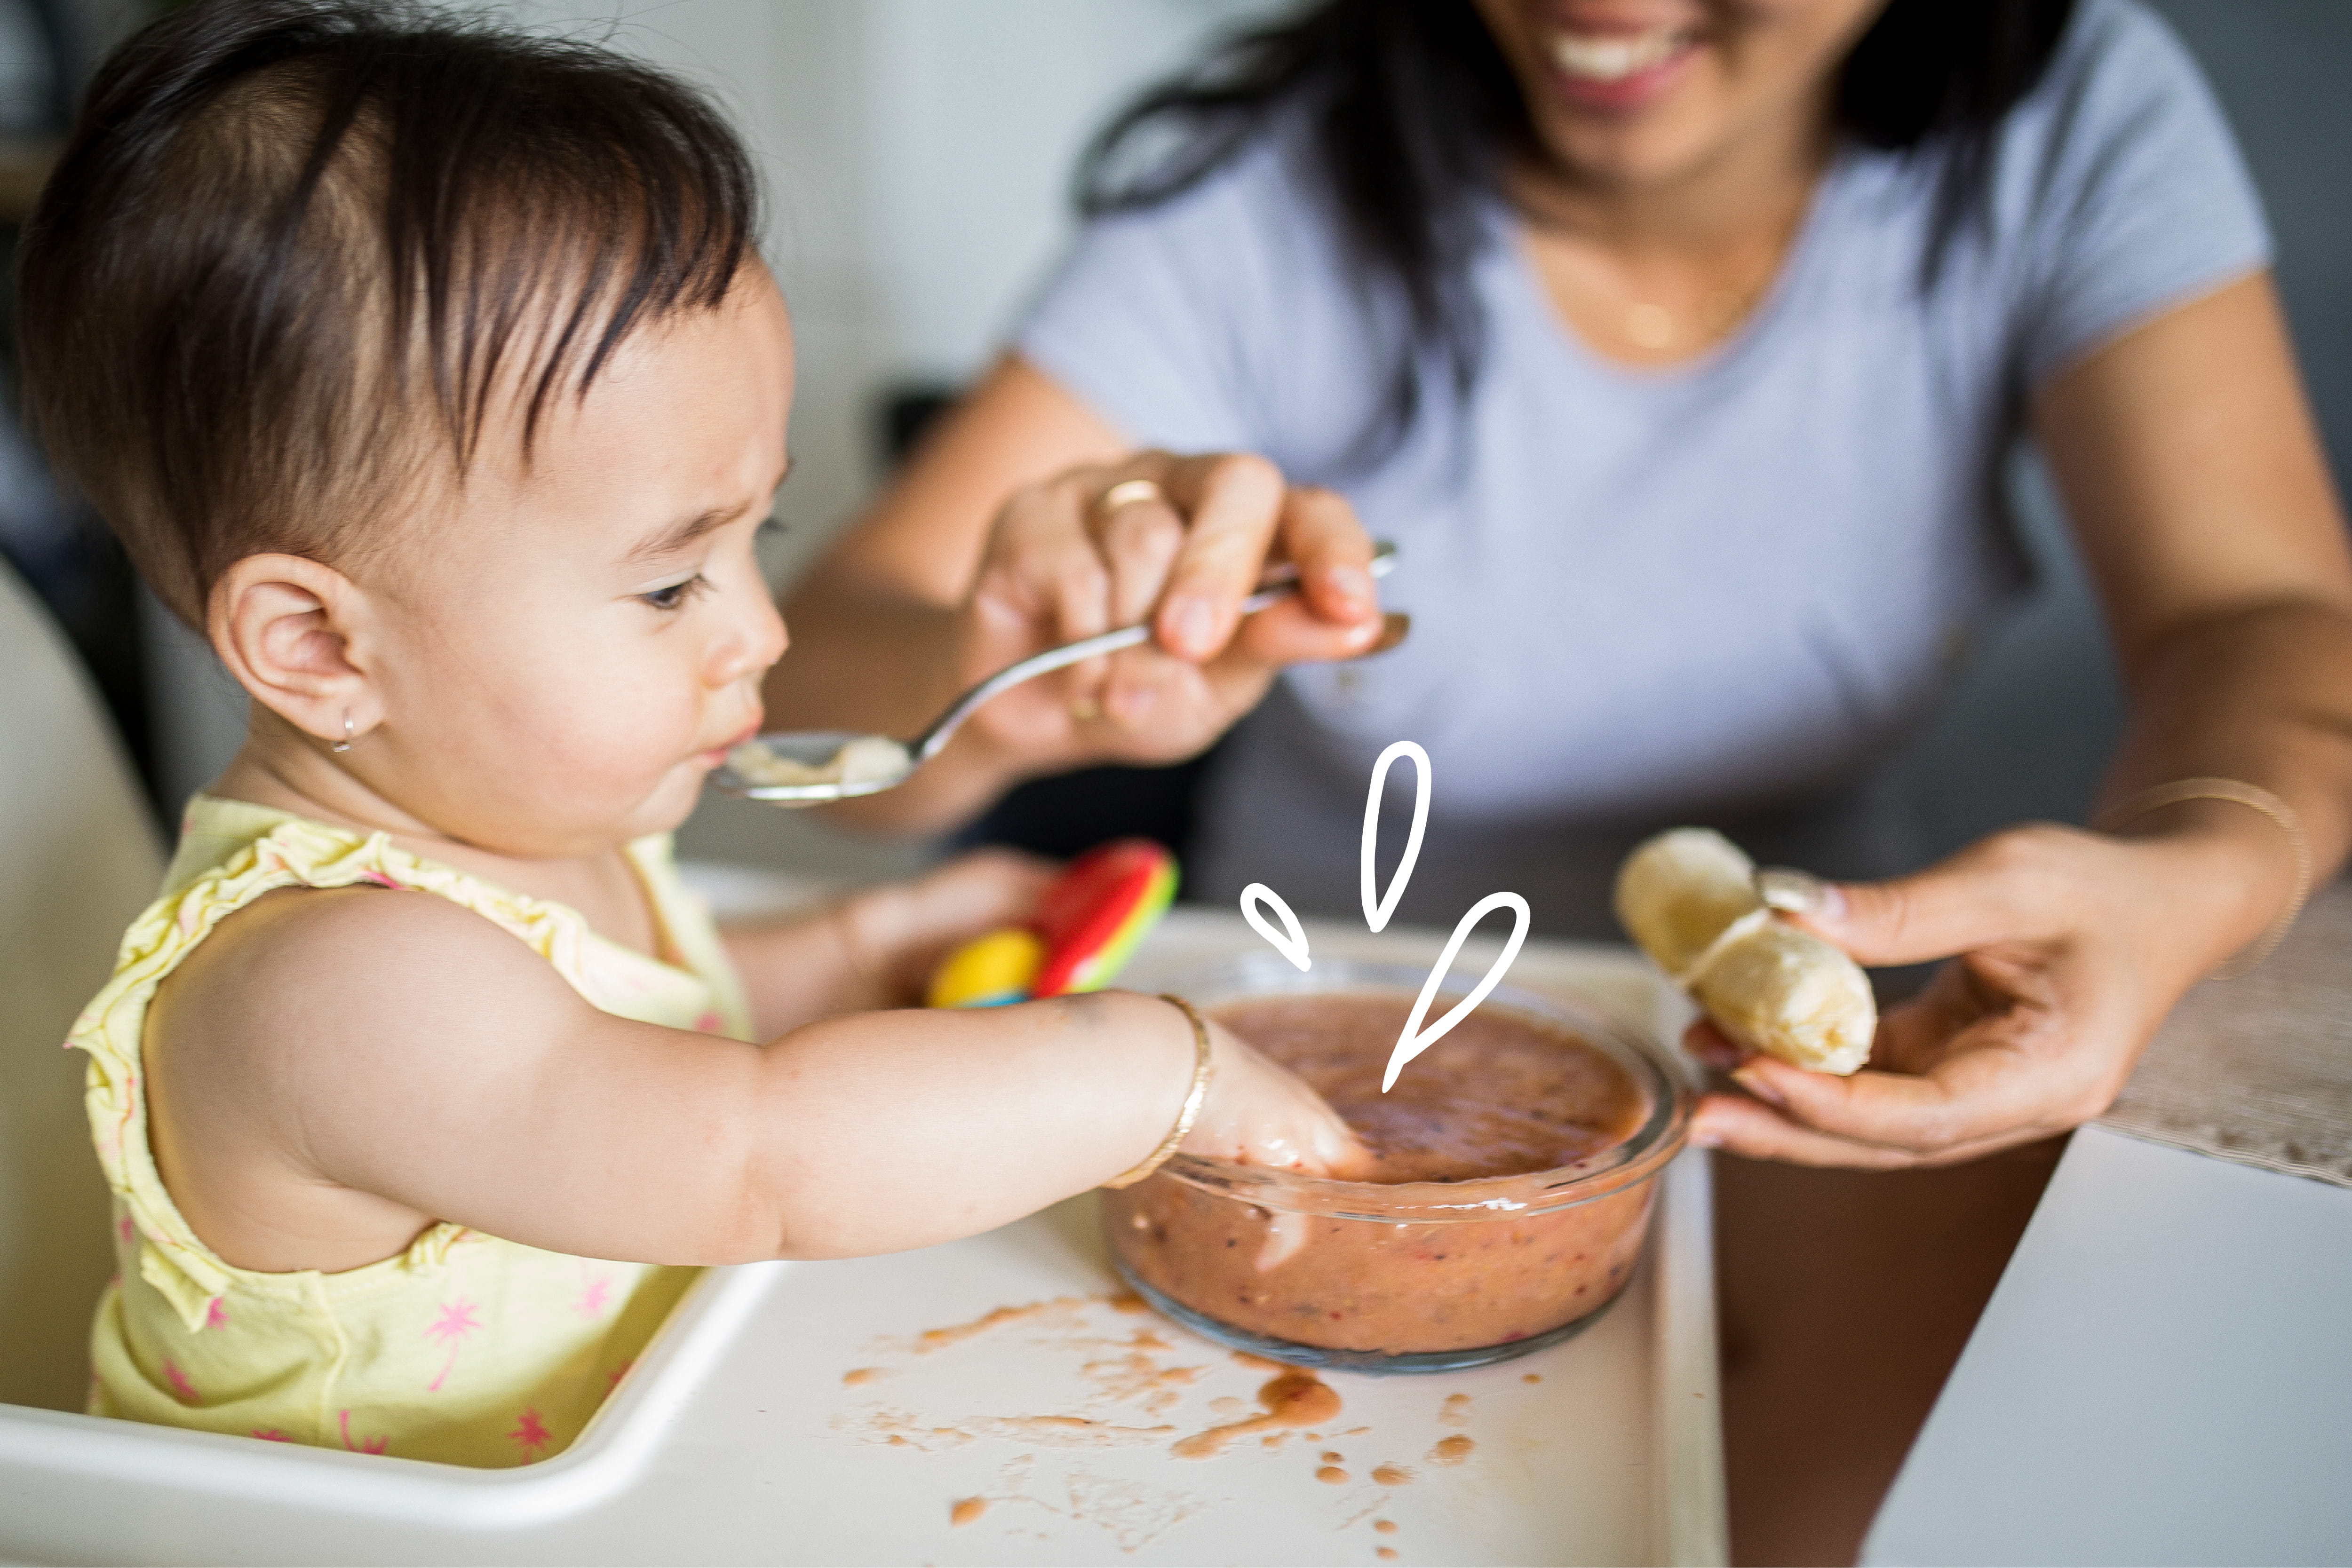 https://www.kindercare.com/-/media/contenthub/images/article-images/lets-eat/baby-foods/kclc_blog_unexpected_foods.jpg